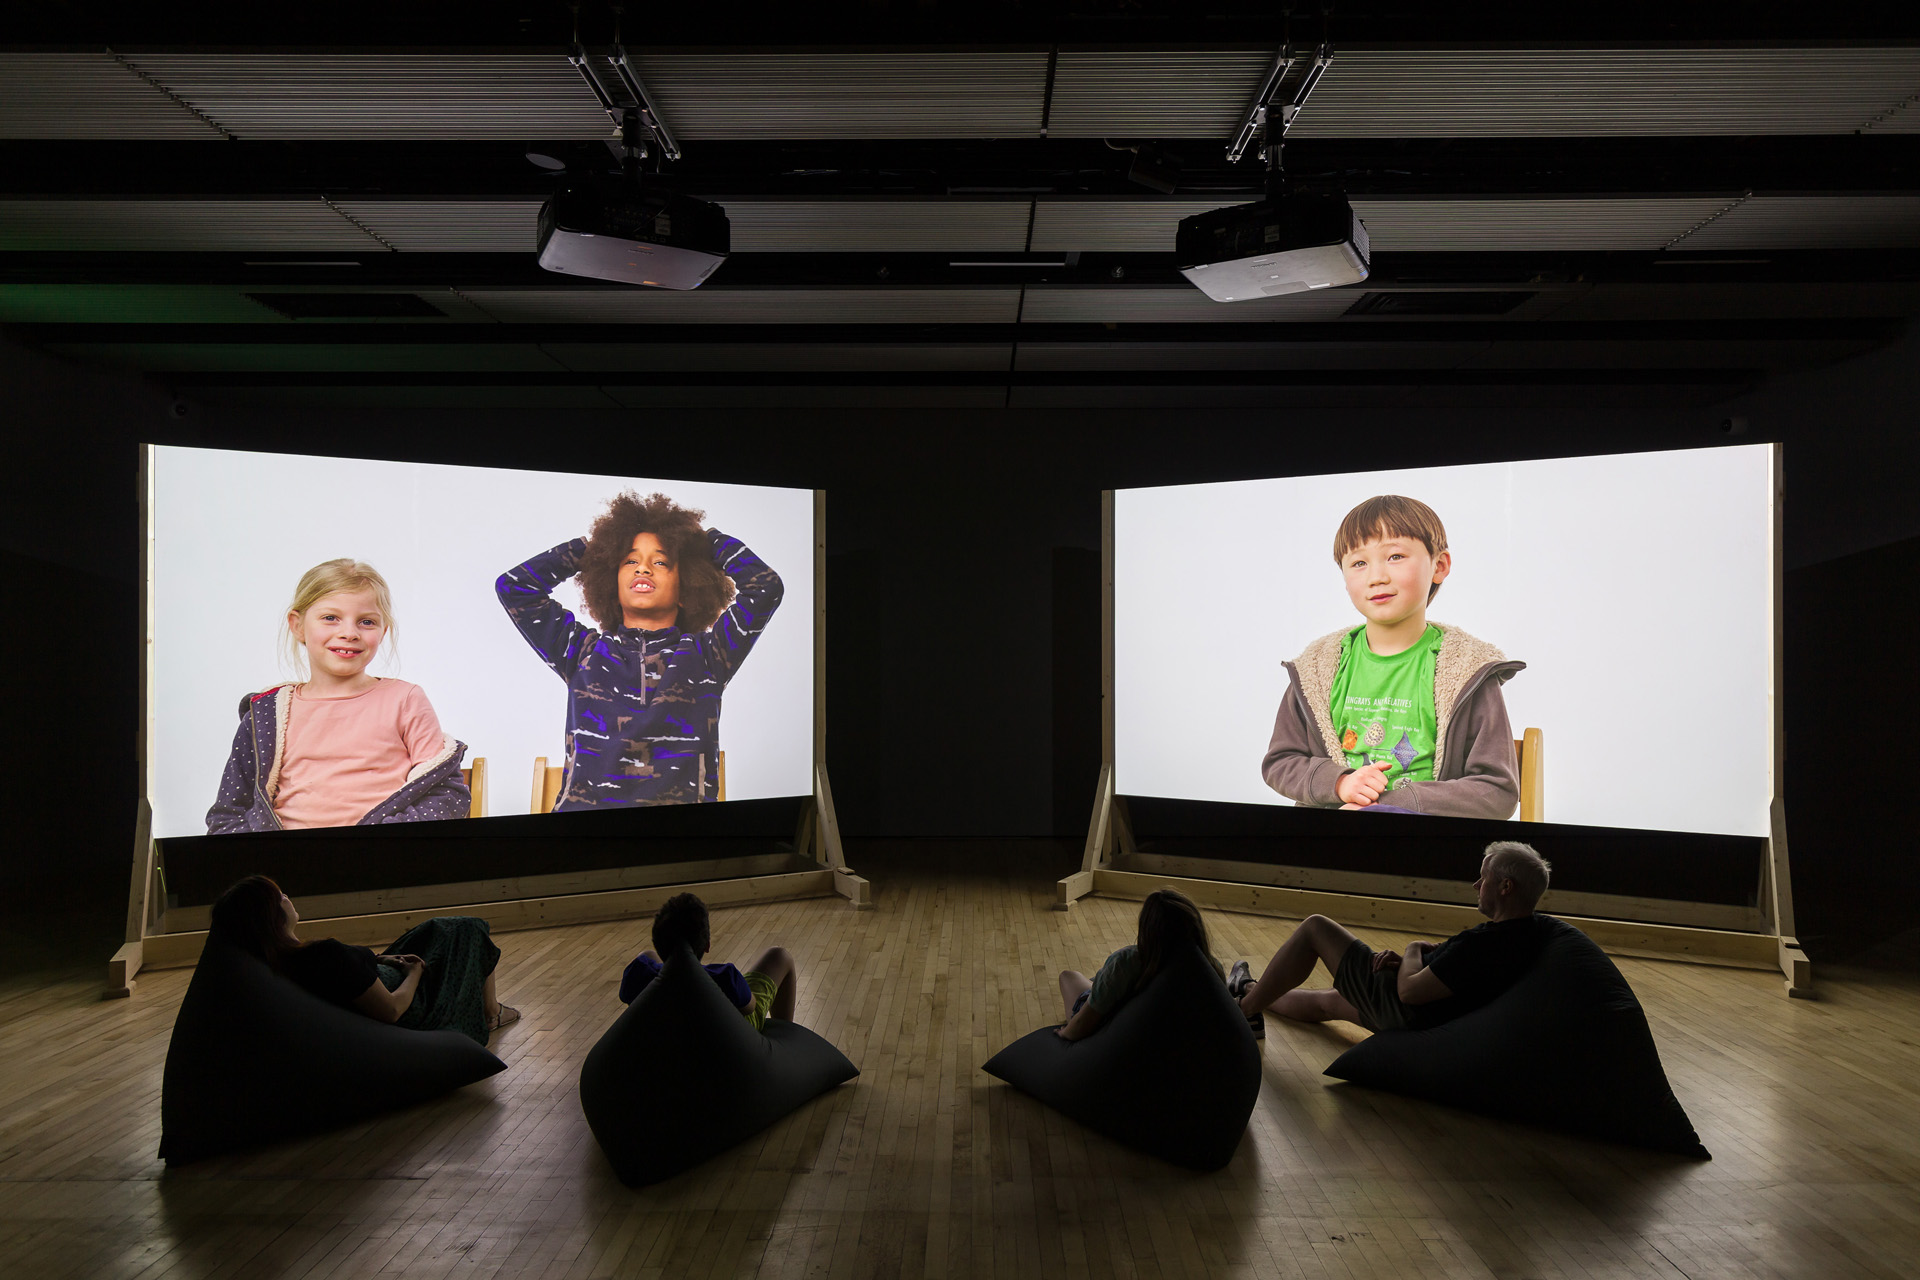 Installation view of Cornelia Parker - children on projected screens